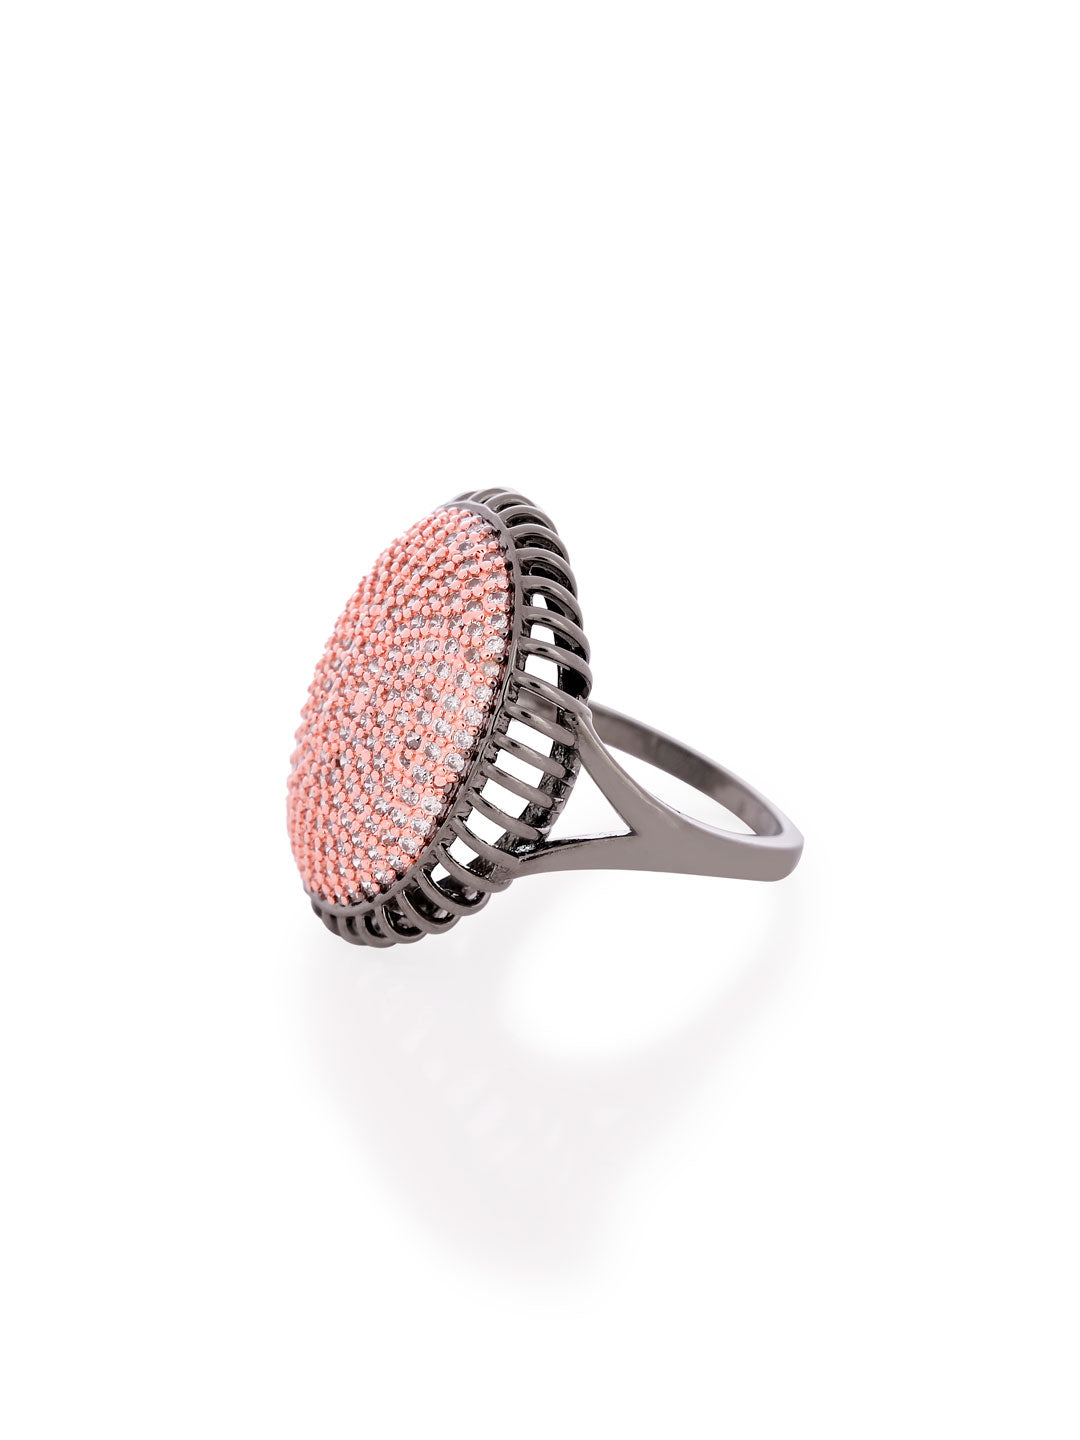 Classic Black Beauty Cocktail Ring